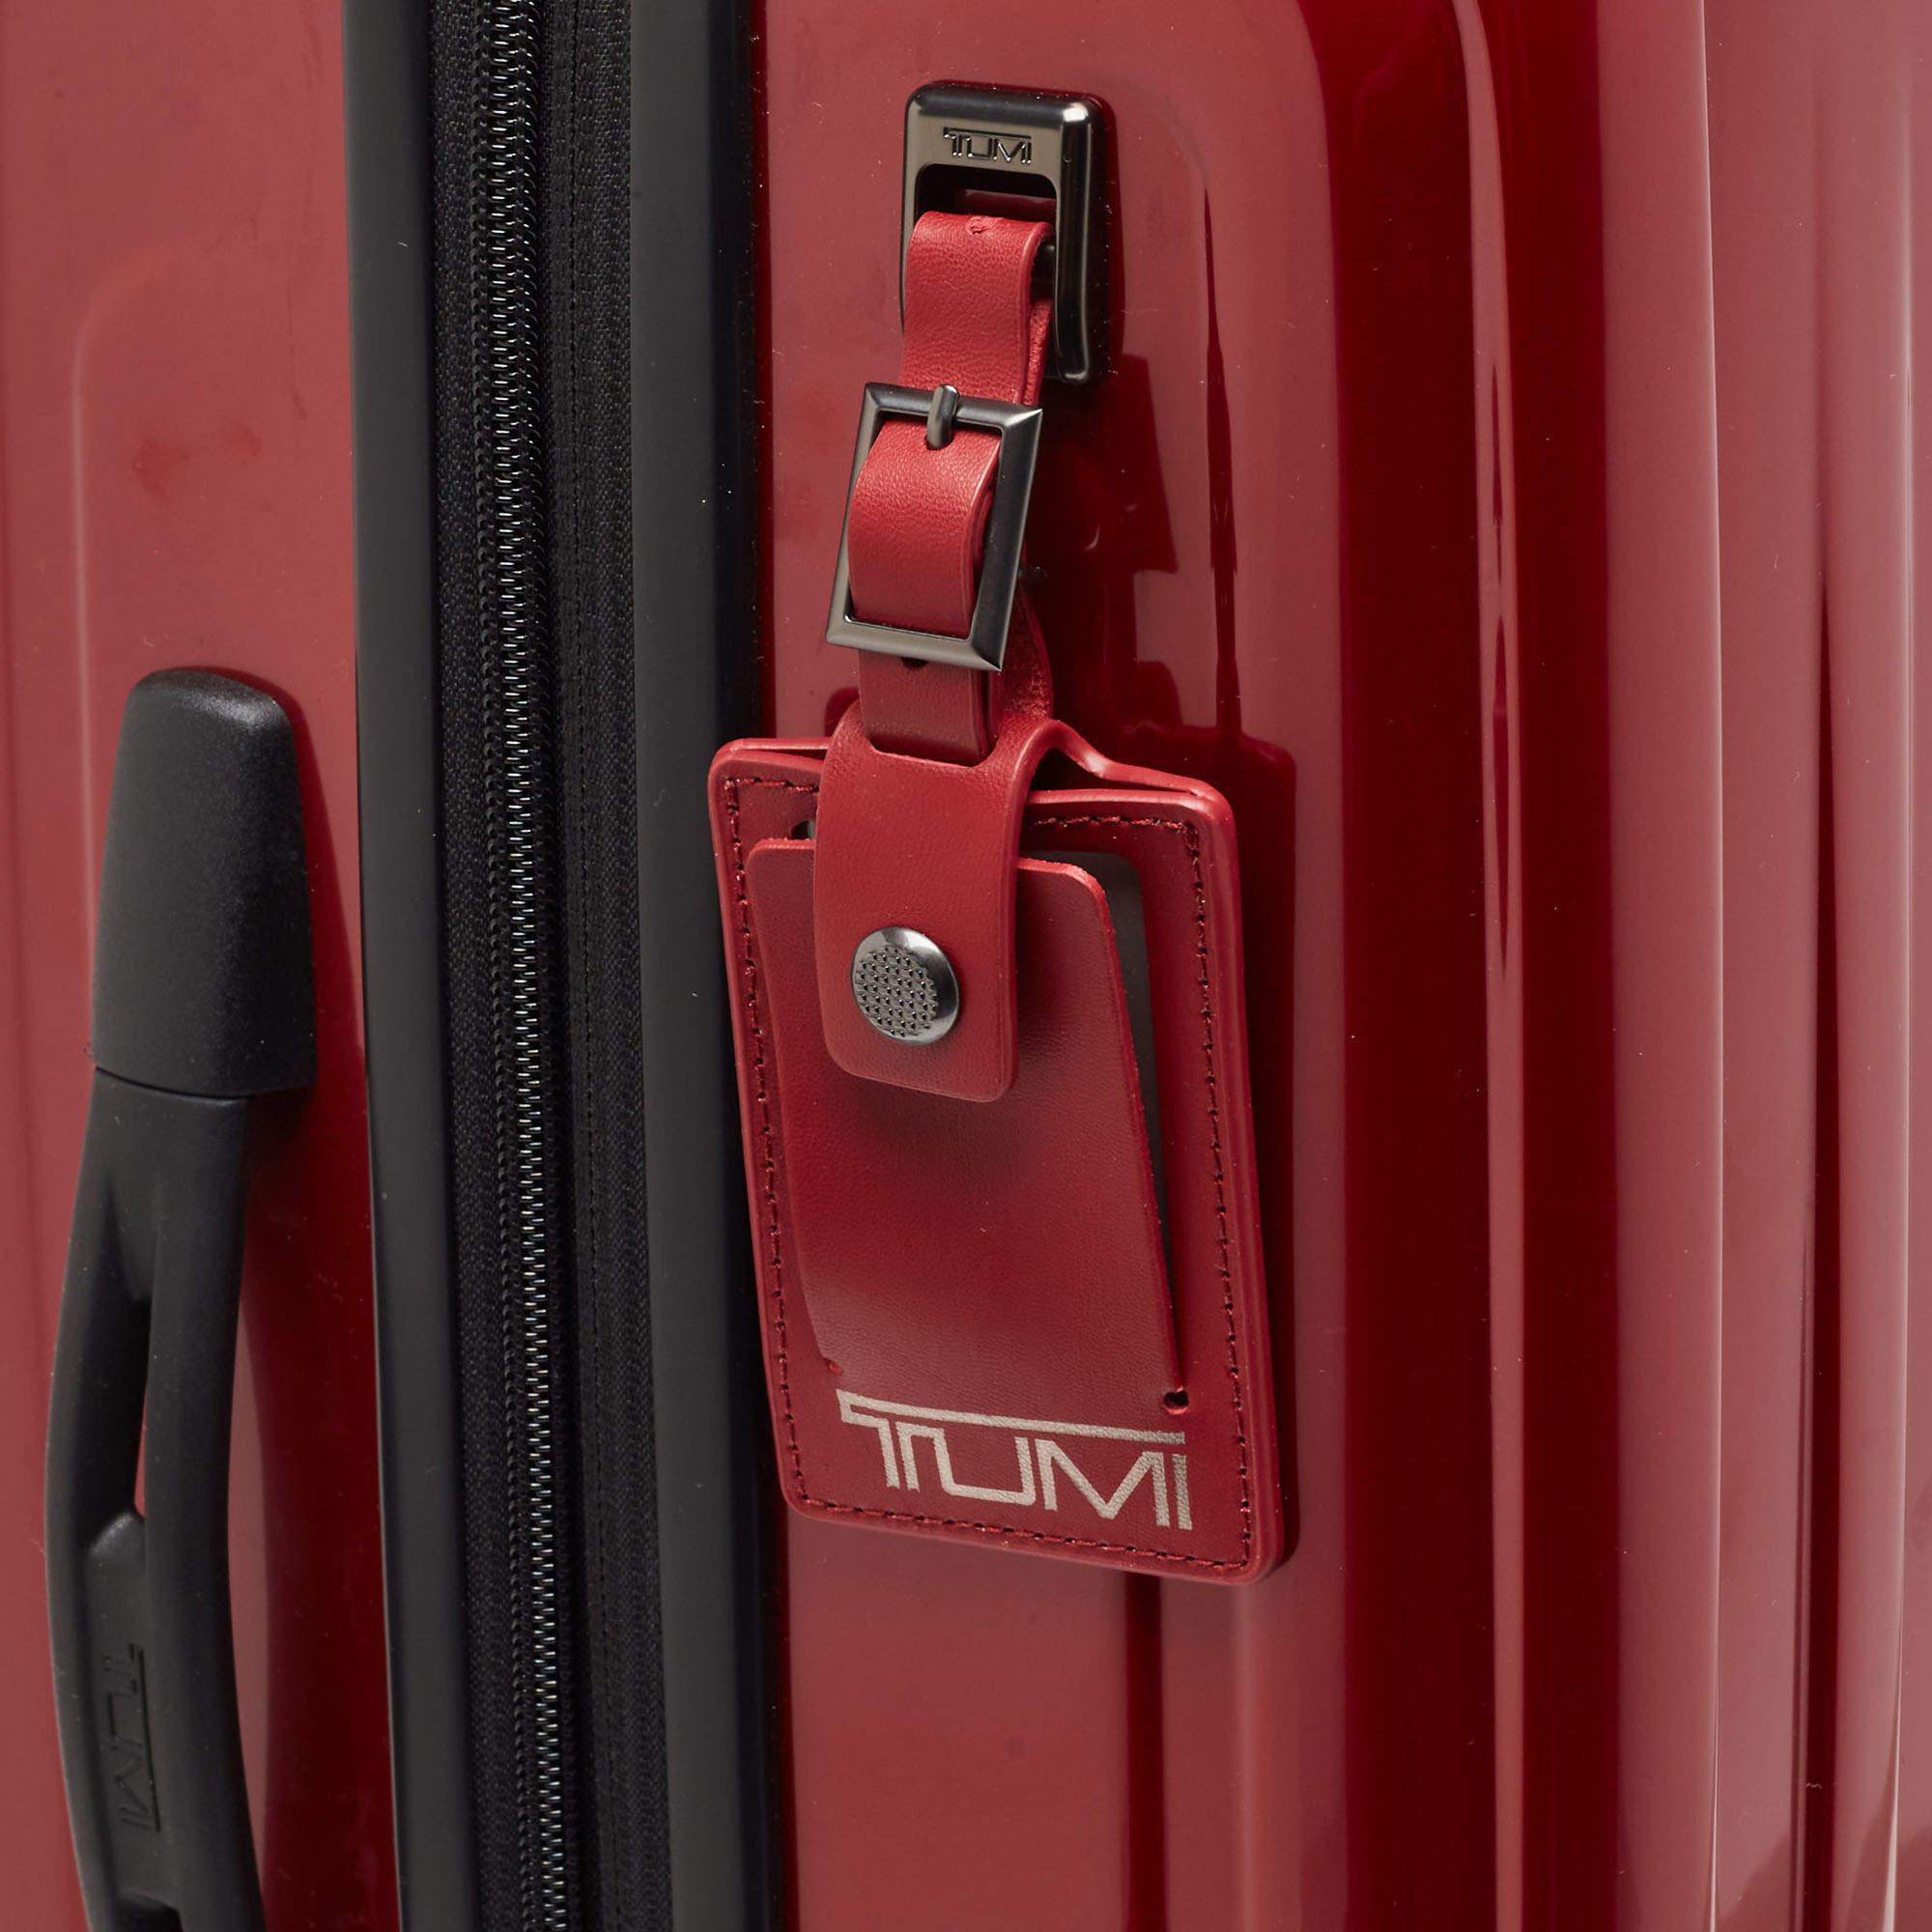 TUMI Red 4 Wheeled V4 International Expandable Carry On Luggage (Bagages à main extensibles à 4 roues) en vente 7